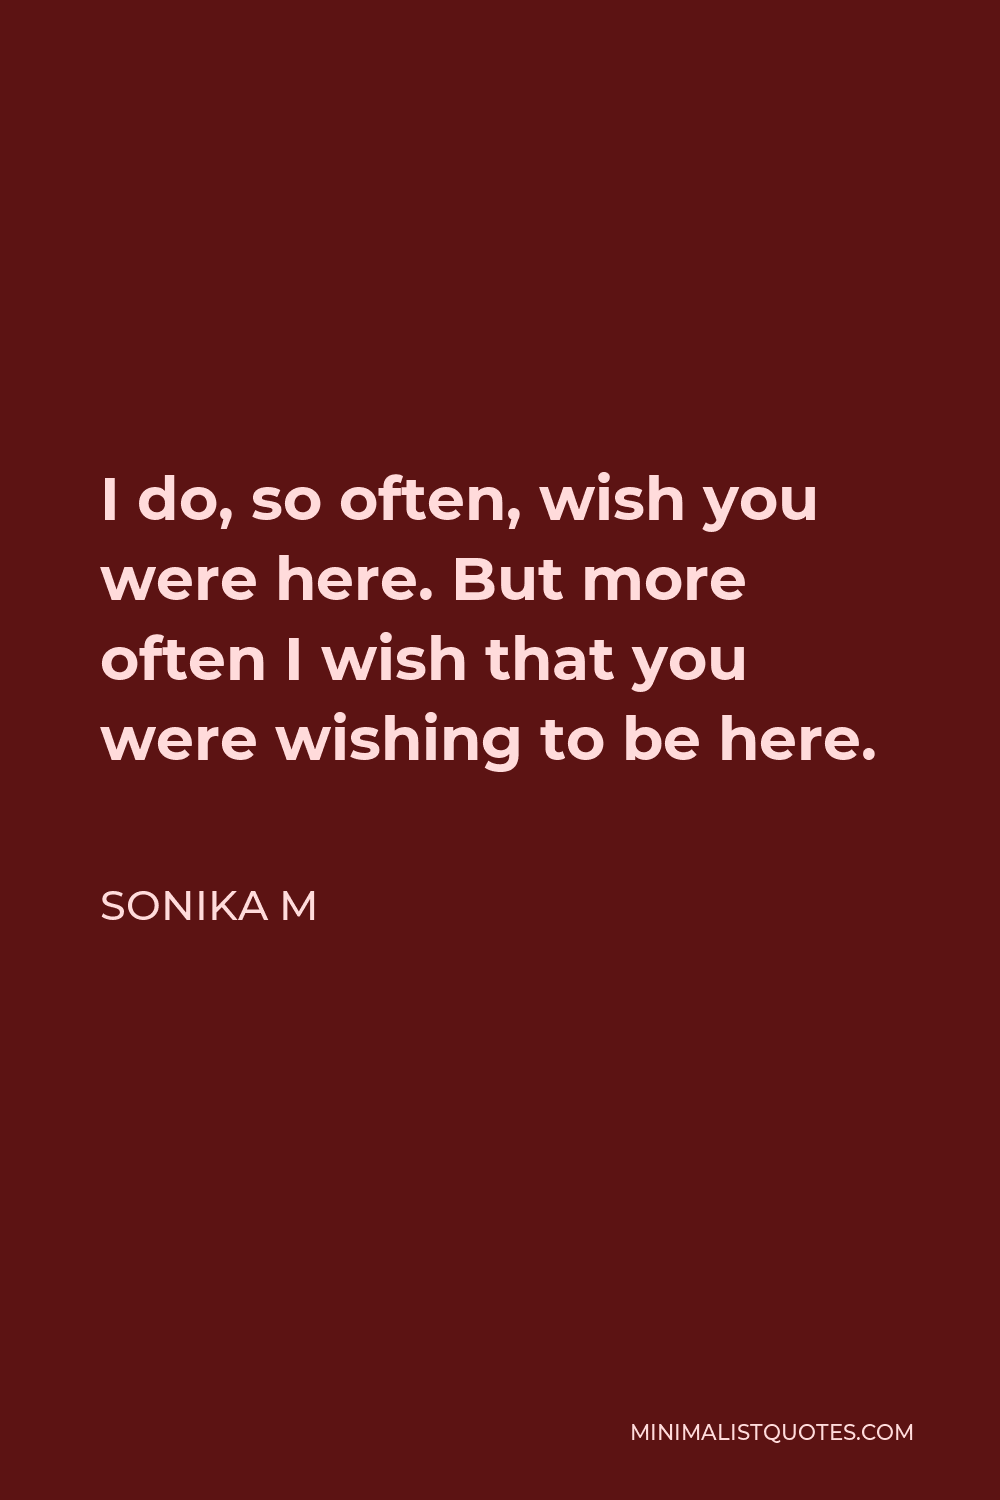 Sonika M Quote - I do, so often, wish you were here. But more often I wish that you were wishing to be here.